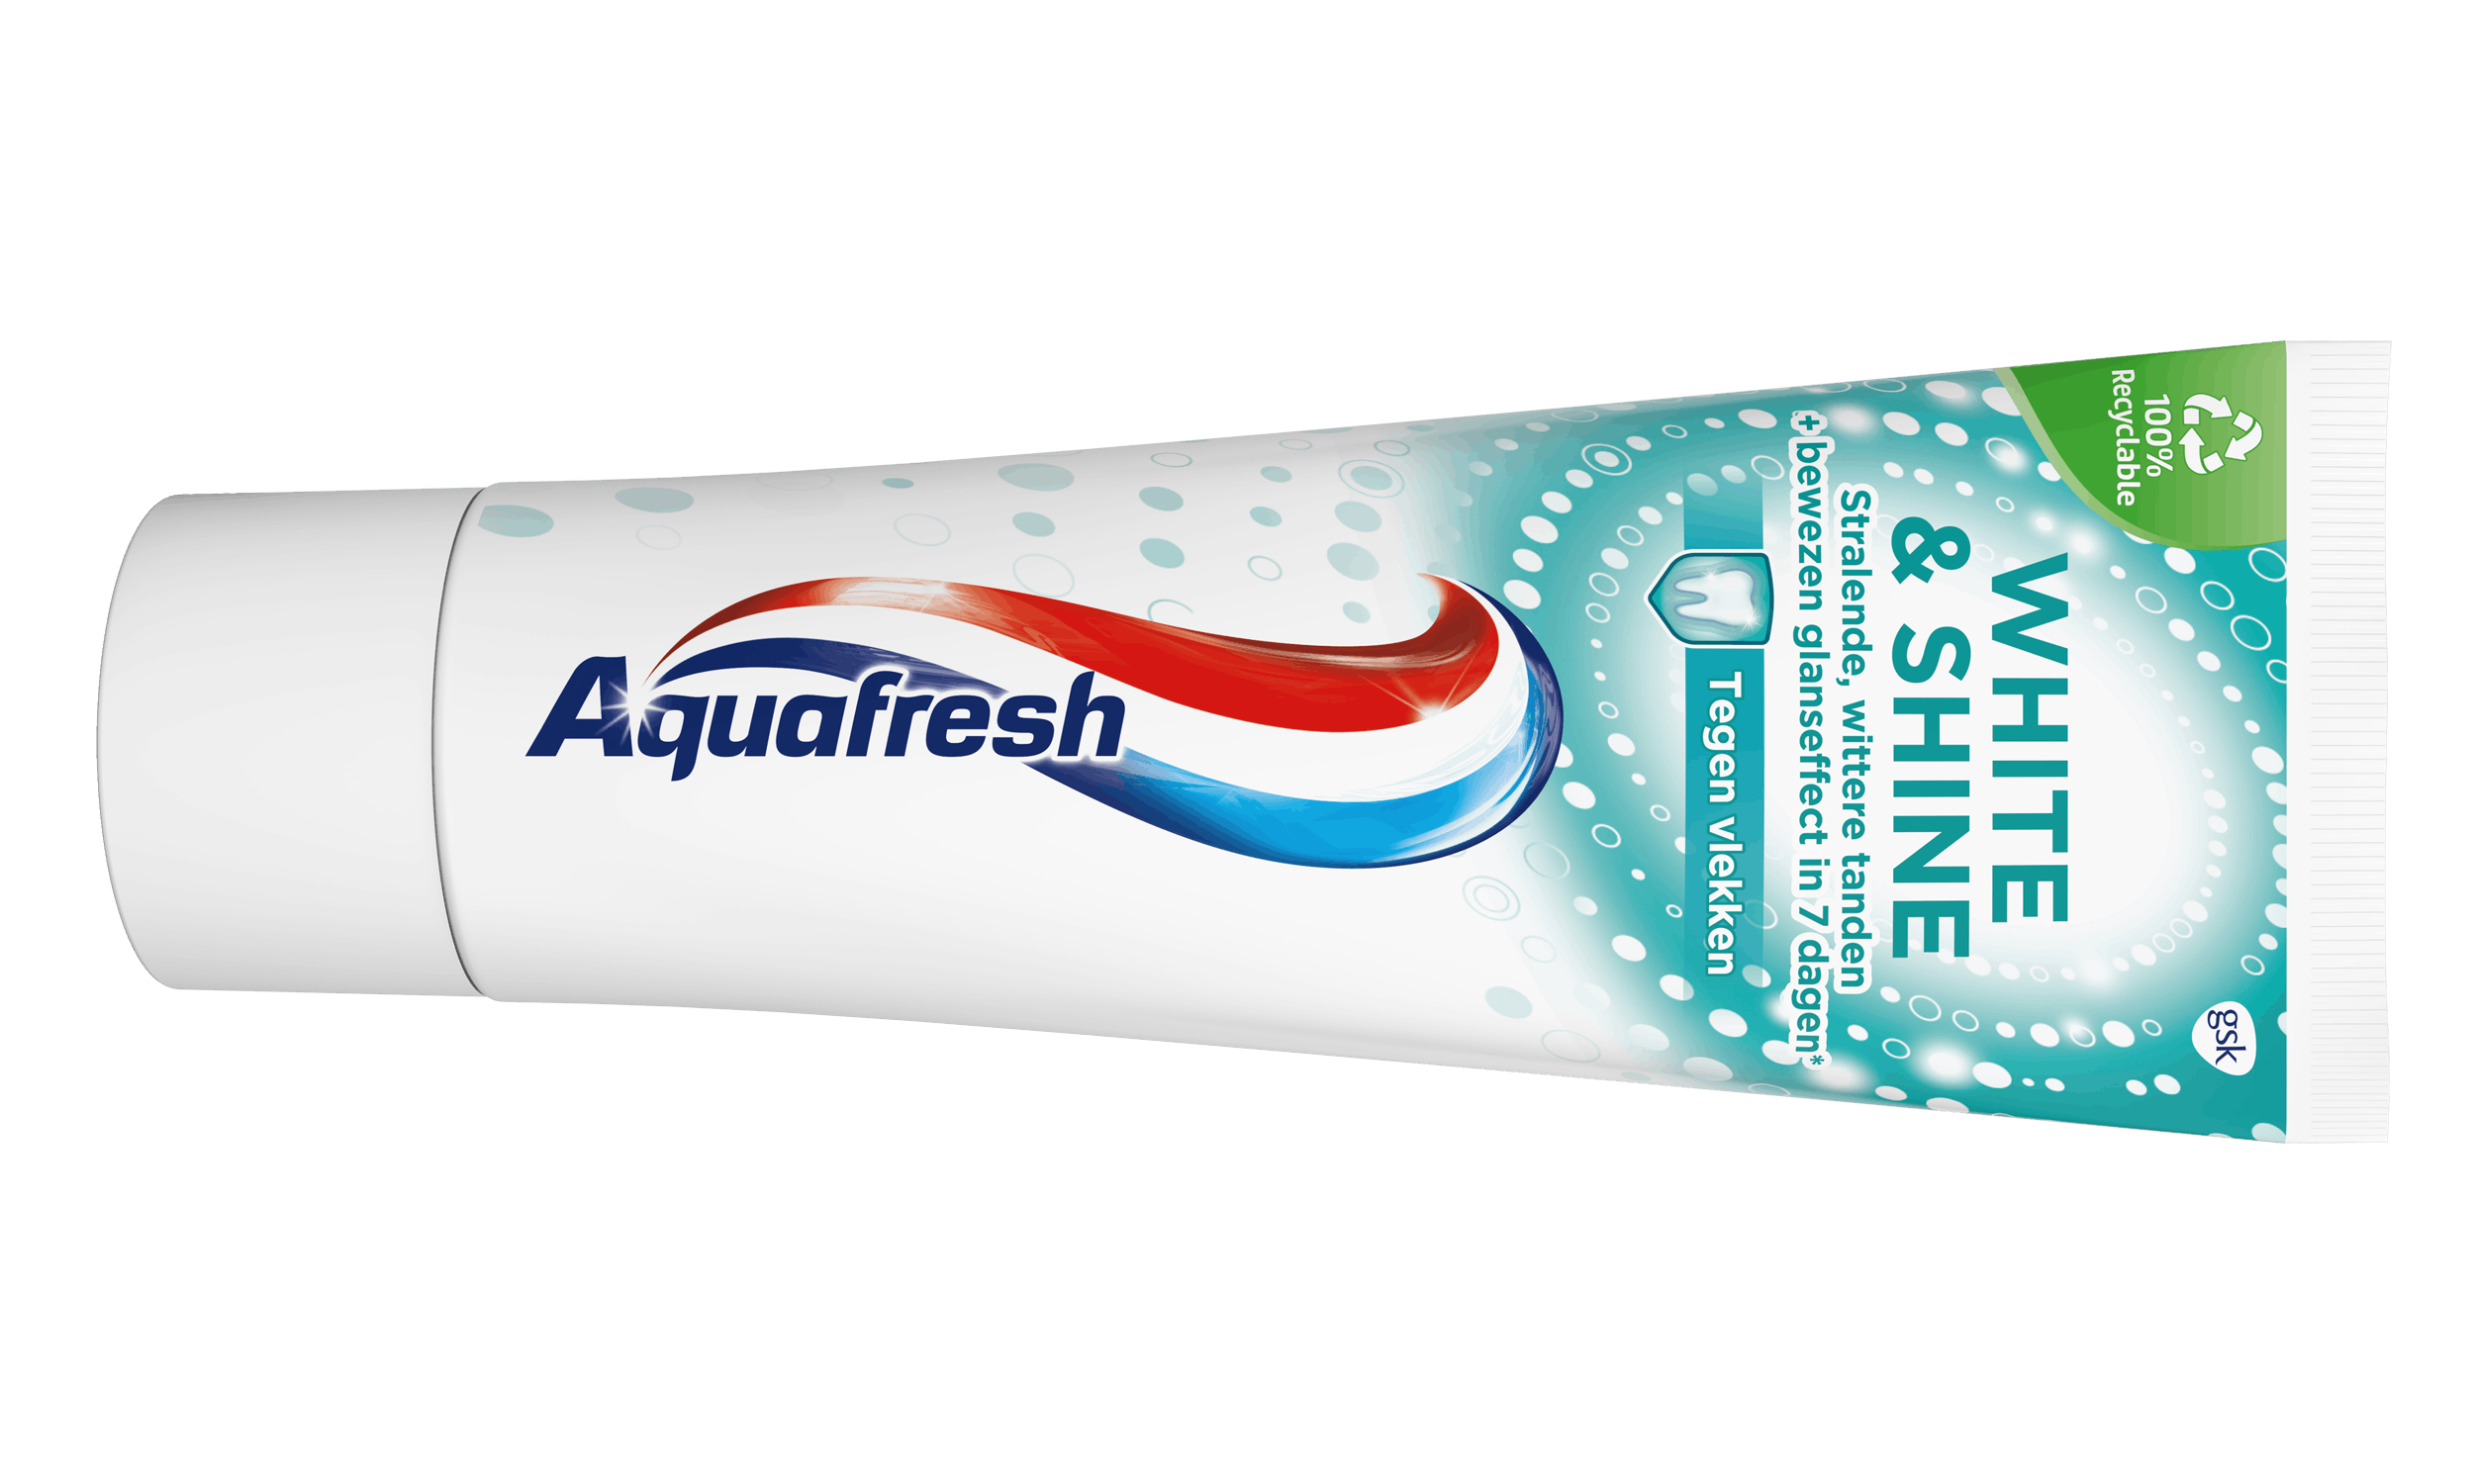 Aquafresh White & Shine toothpaste grey packaging with light blue accent.